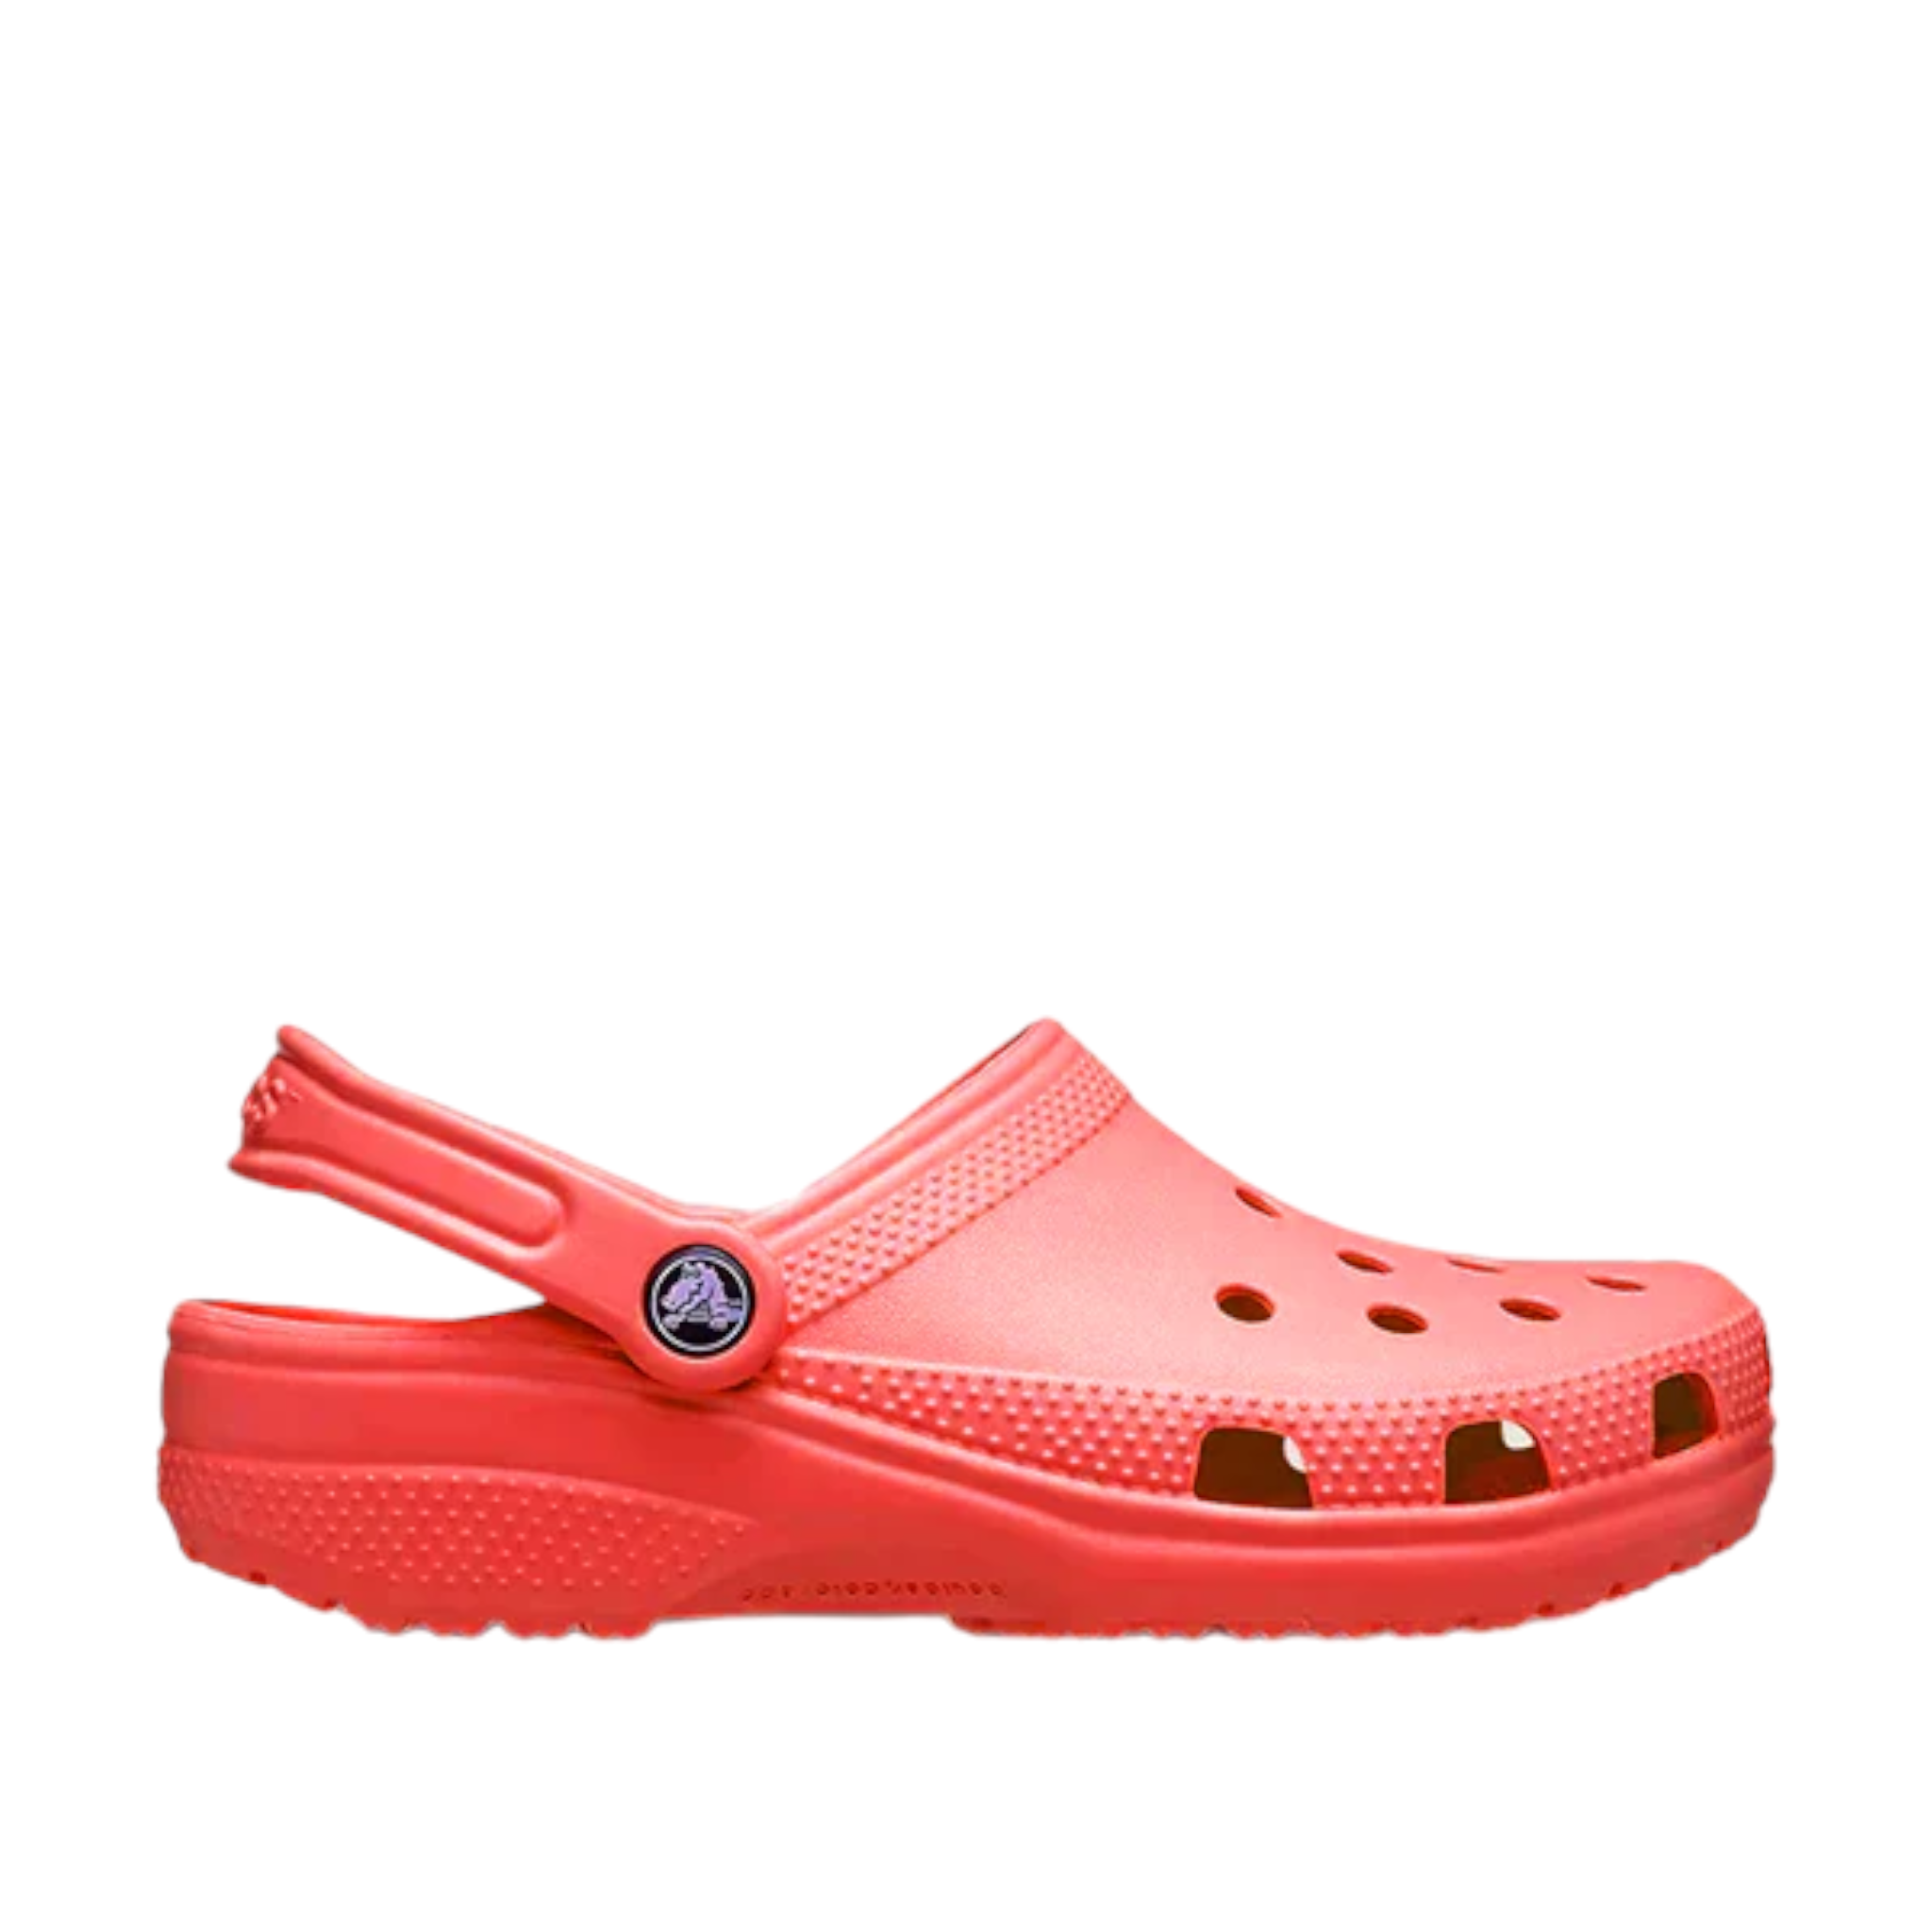 Crocs Classic Clogs online and instore with shoe&amp;me Mount Maunganui. Shop Flame Clogs